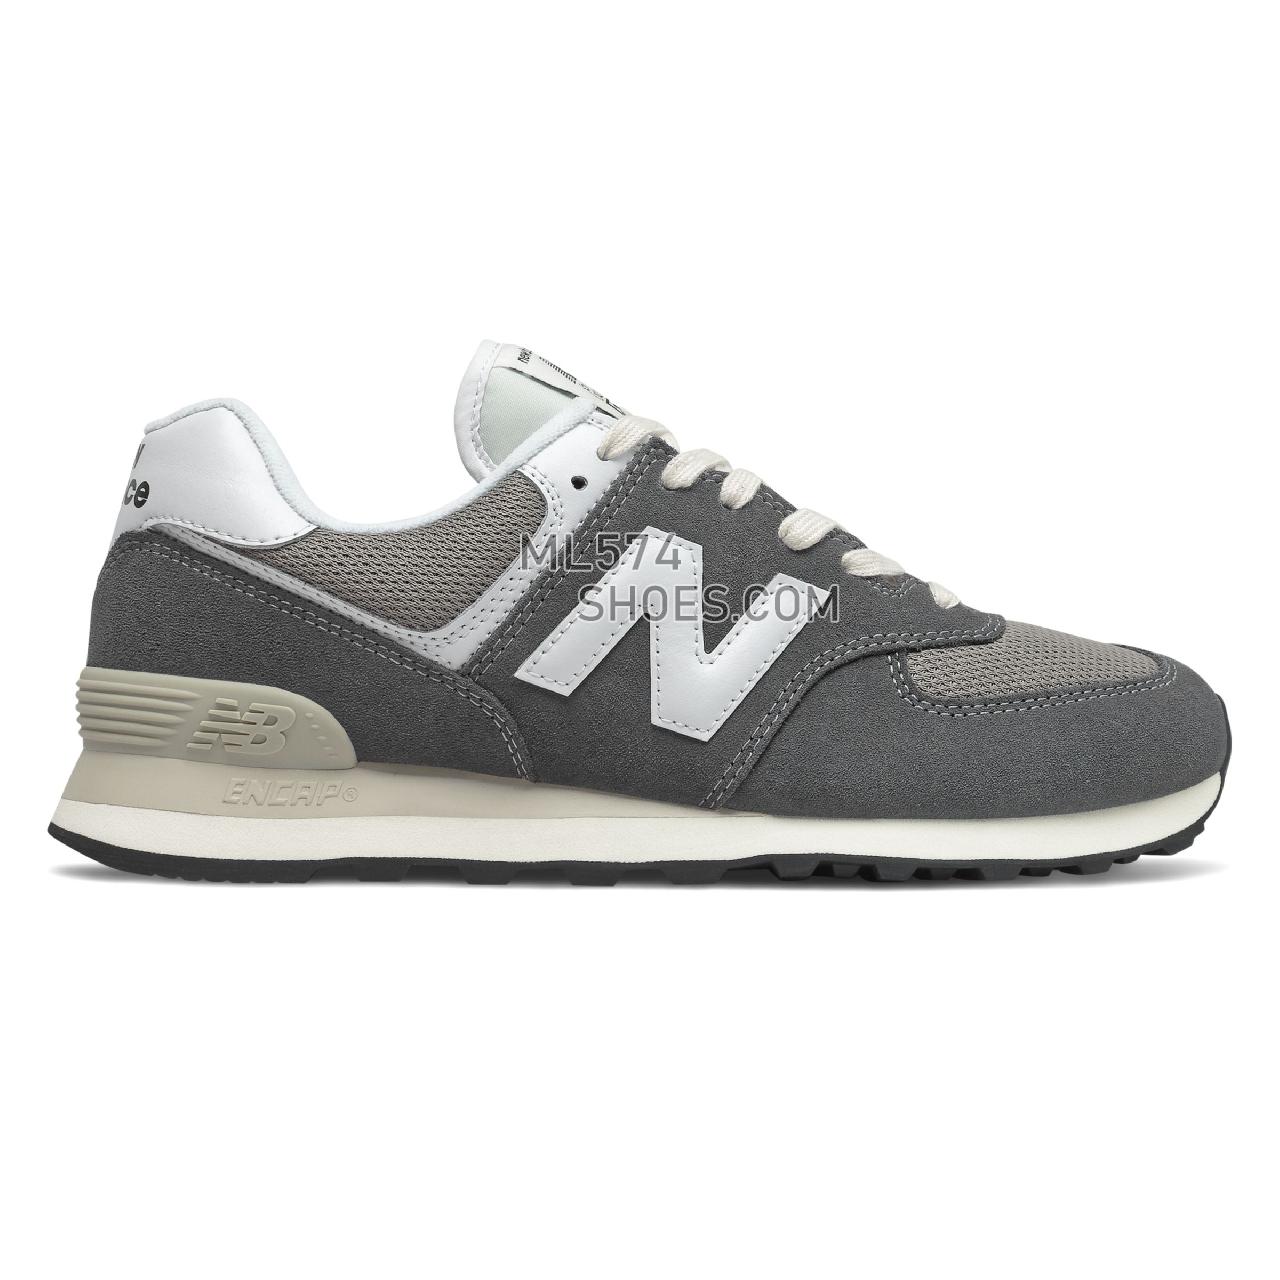 New Balance 574v2 - Men's Classic Sneakers - Magnet with Sea Salt - ML574HD2